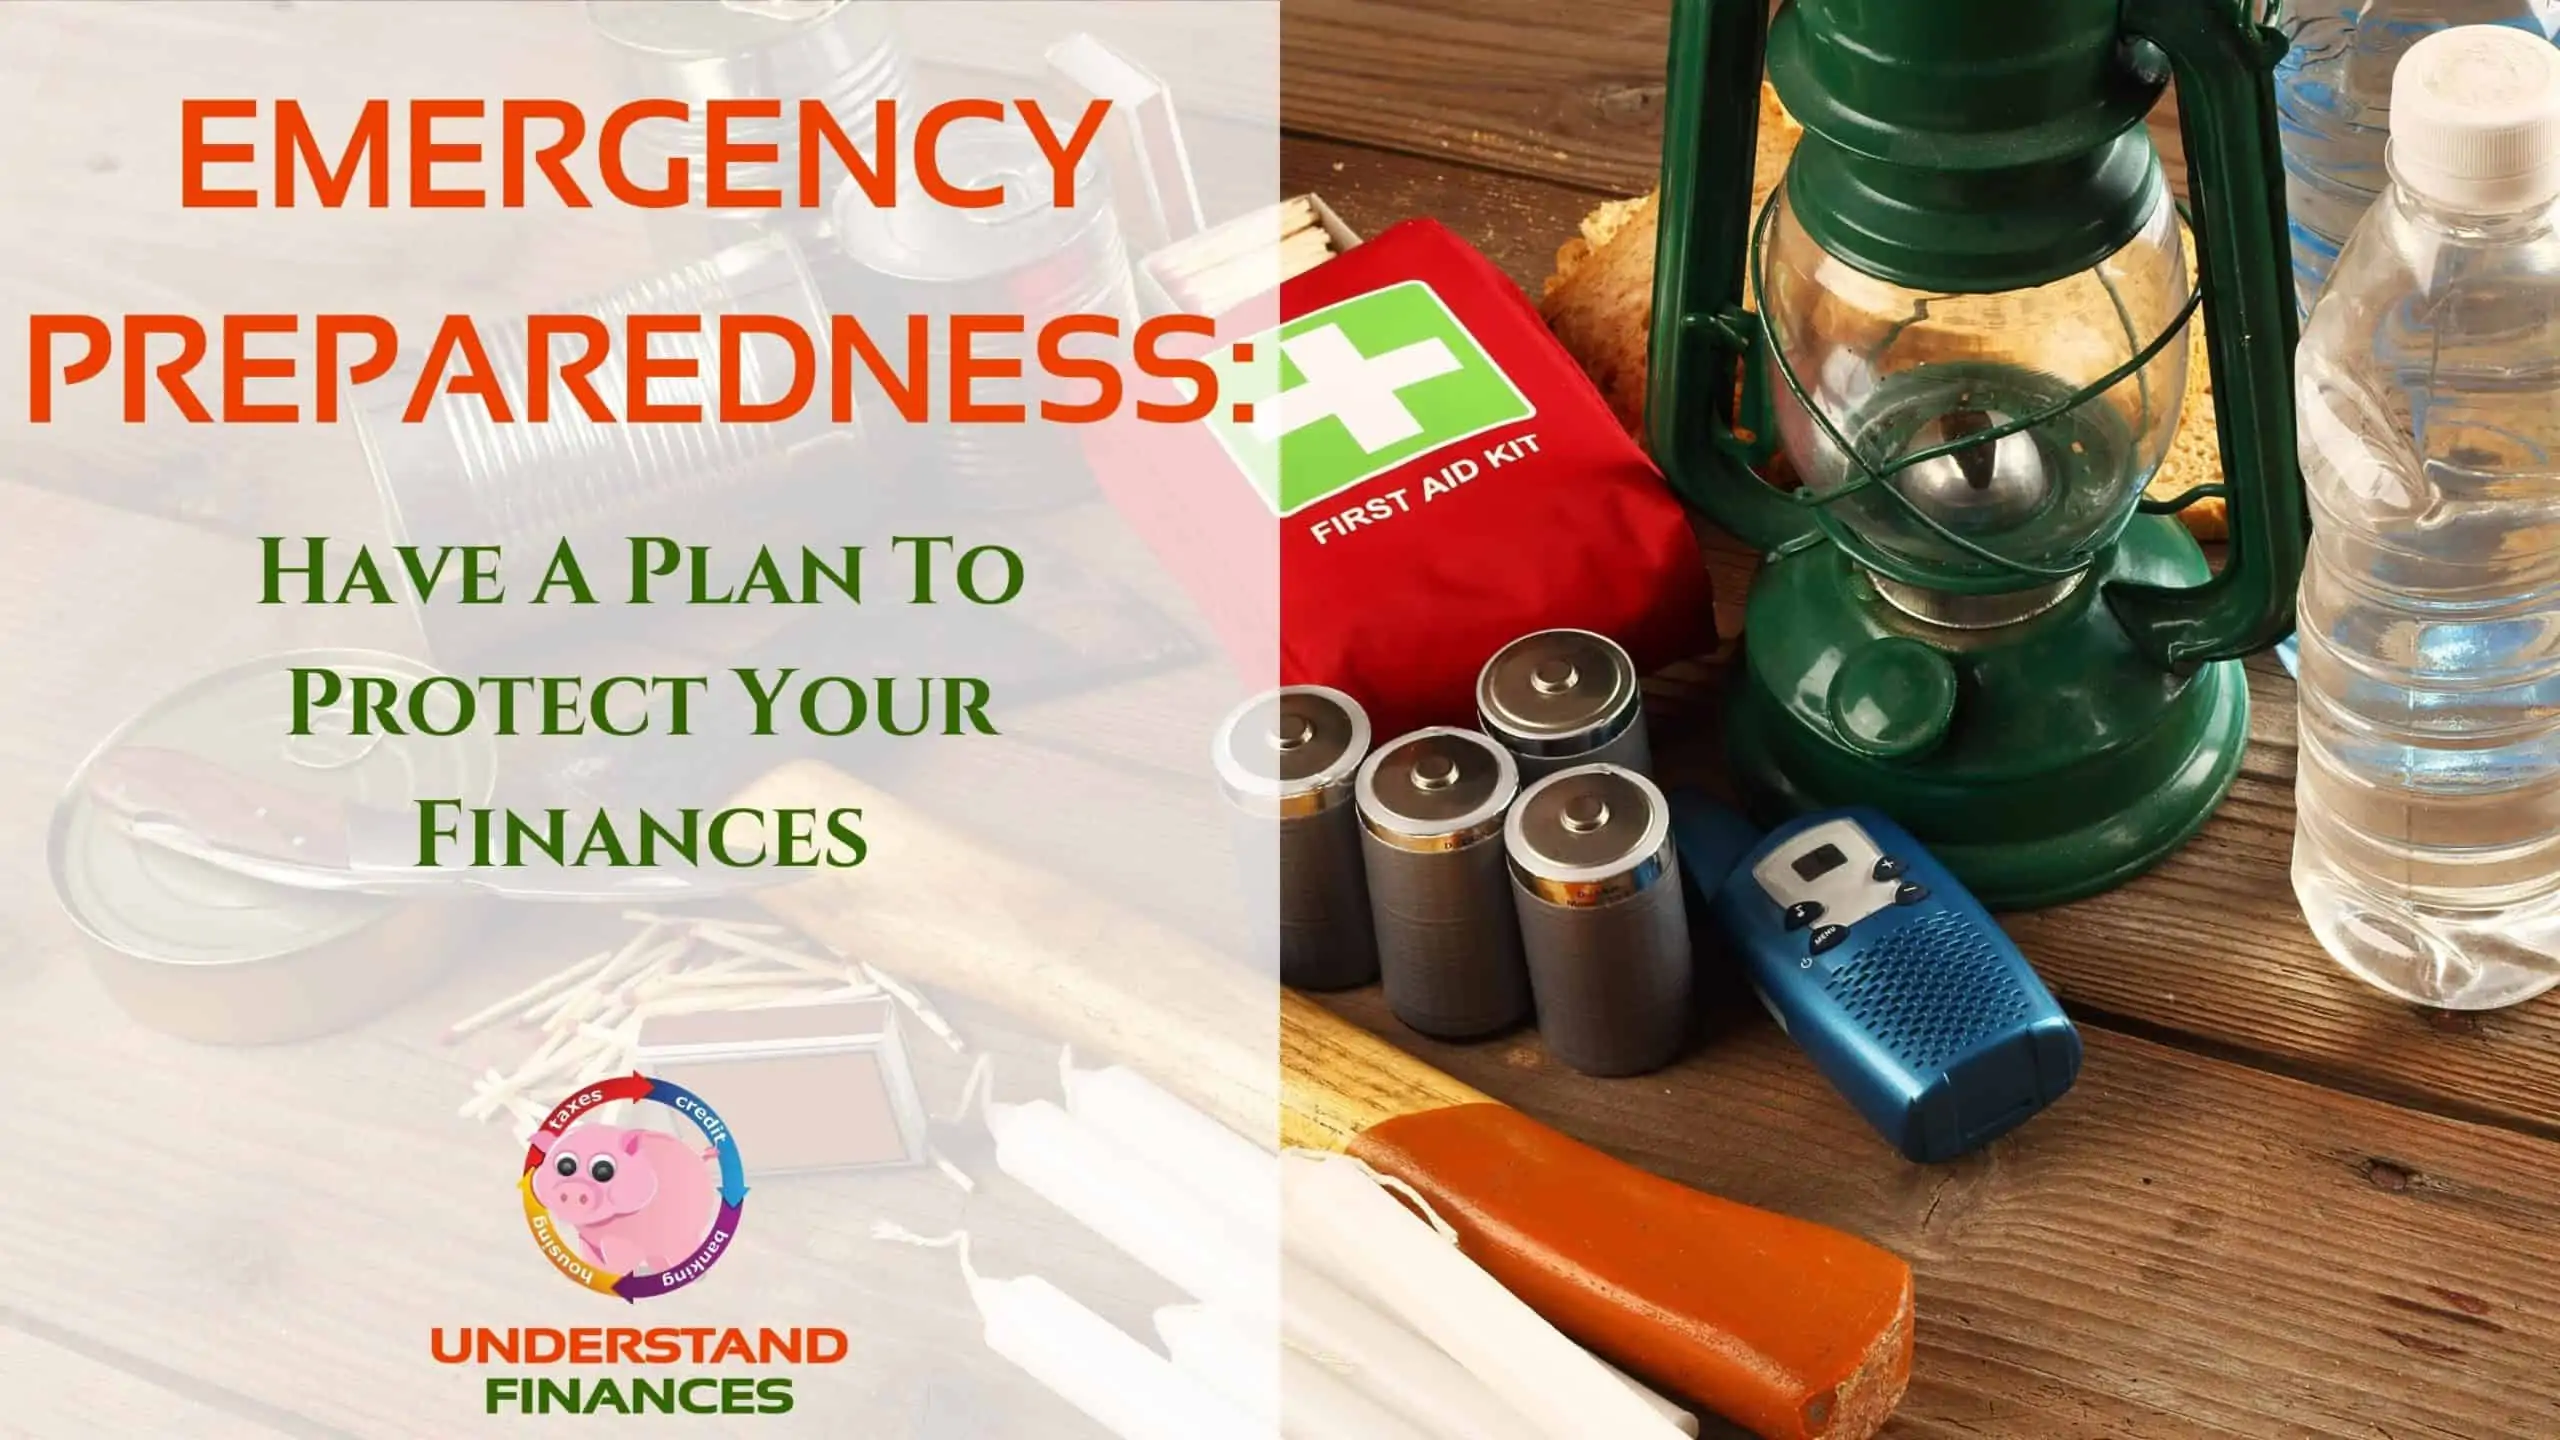 Emergency preparedness supply kit including an oil lantern, first aid kit, batteries, candles, matches, canned food, bottled water, knife, hatchet on a wooden table